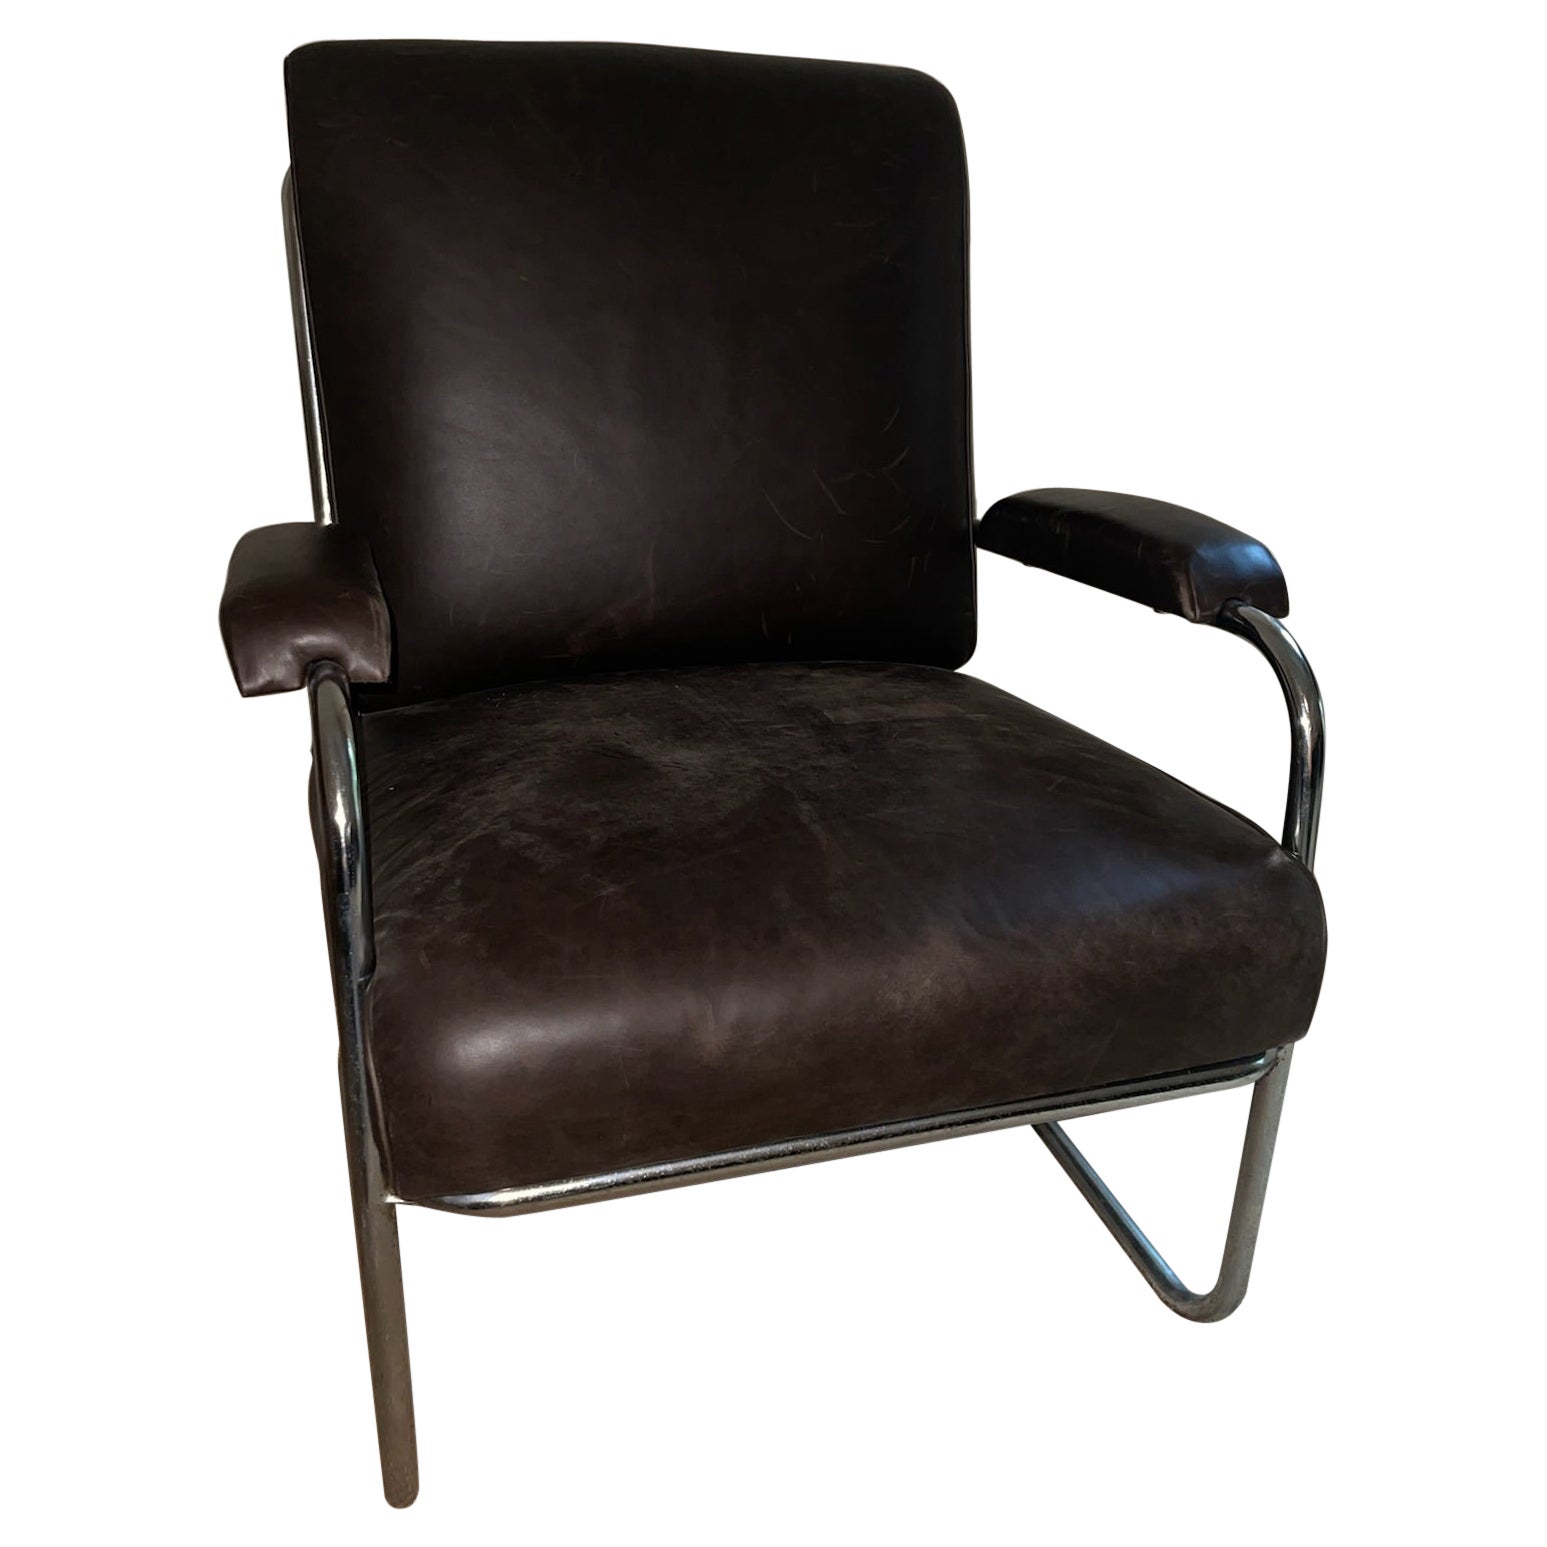 Vintage Early 20th C. English Tubular Chair in Brown Leather For Sale